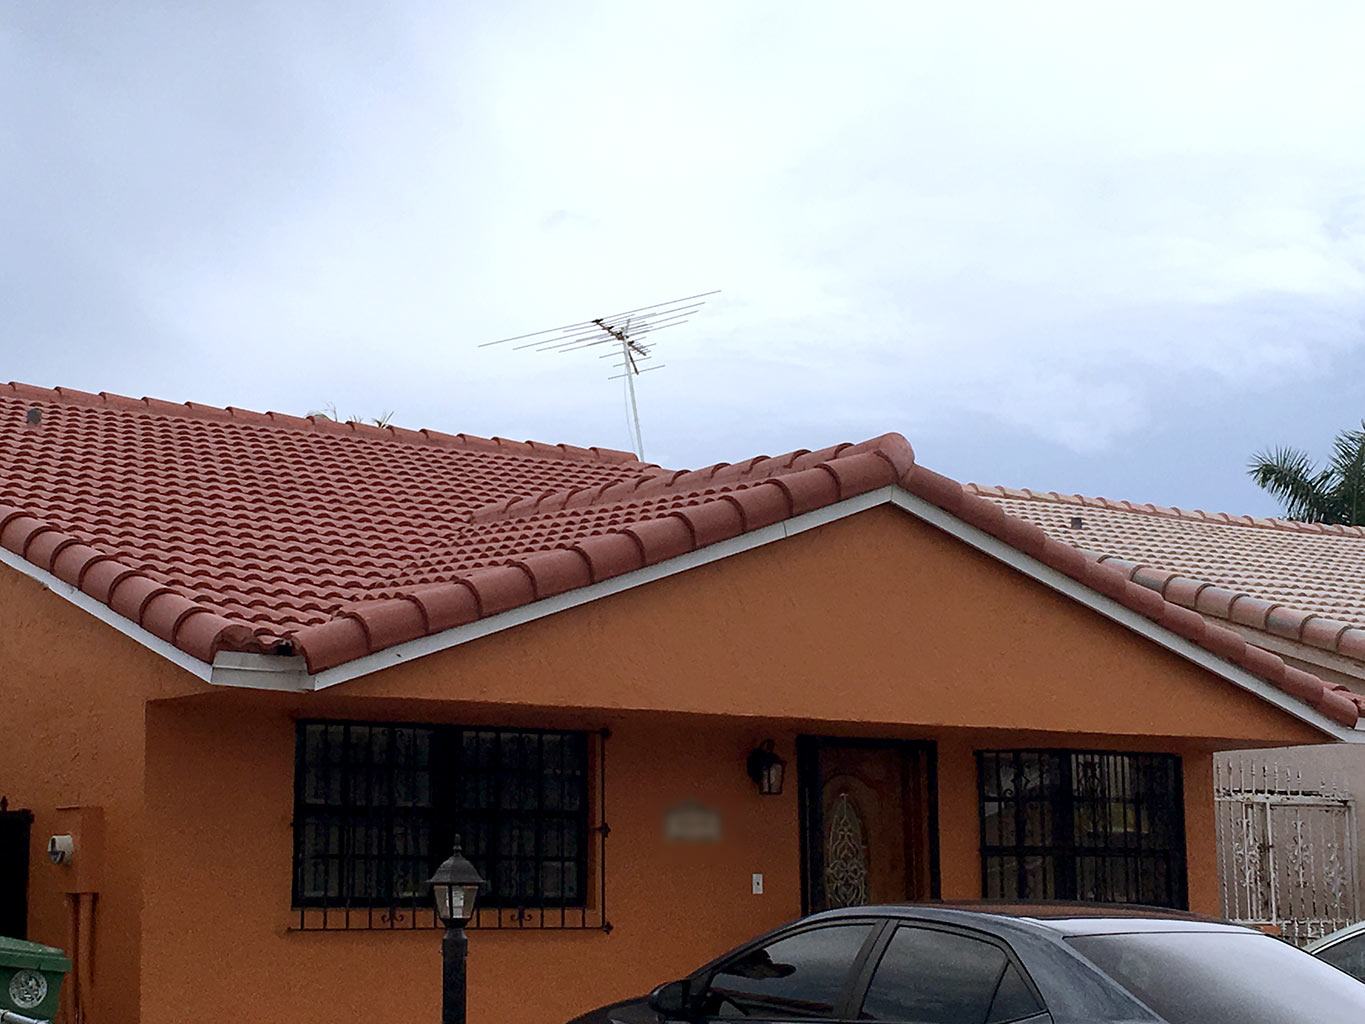 Completed concrete tile roof